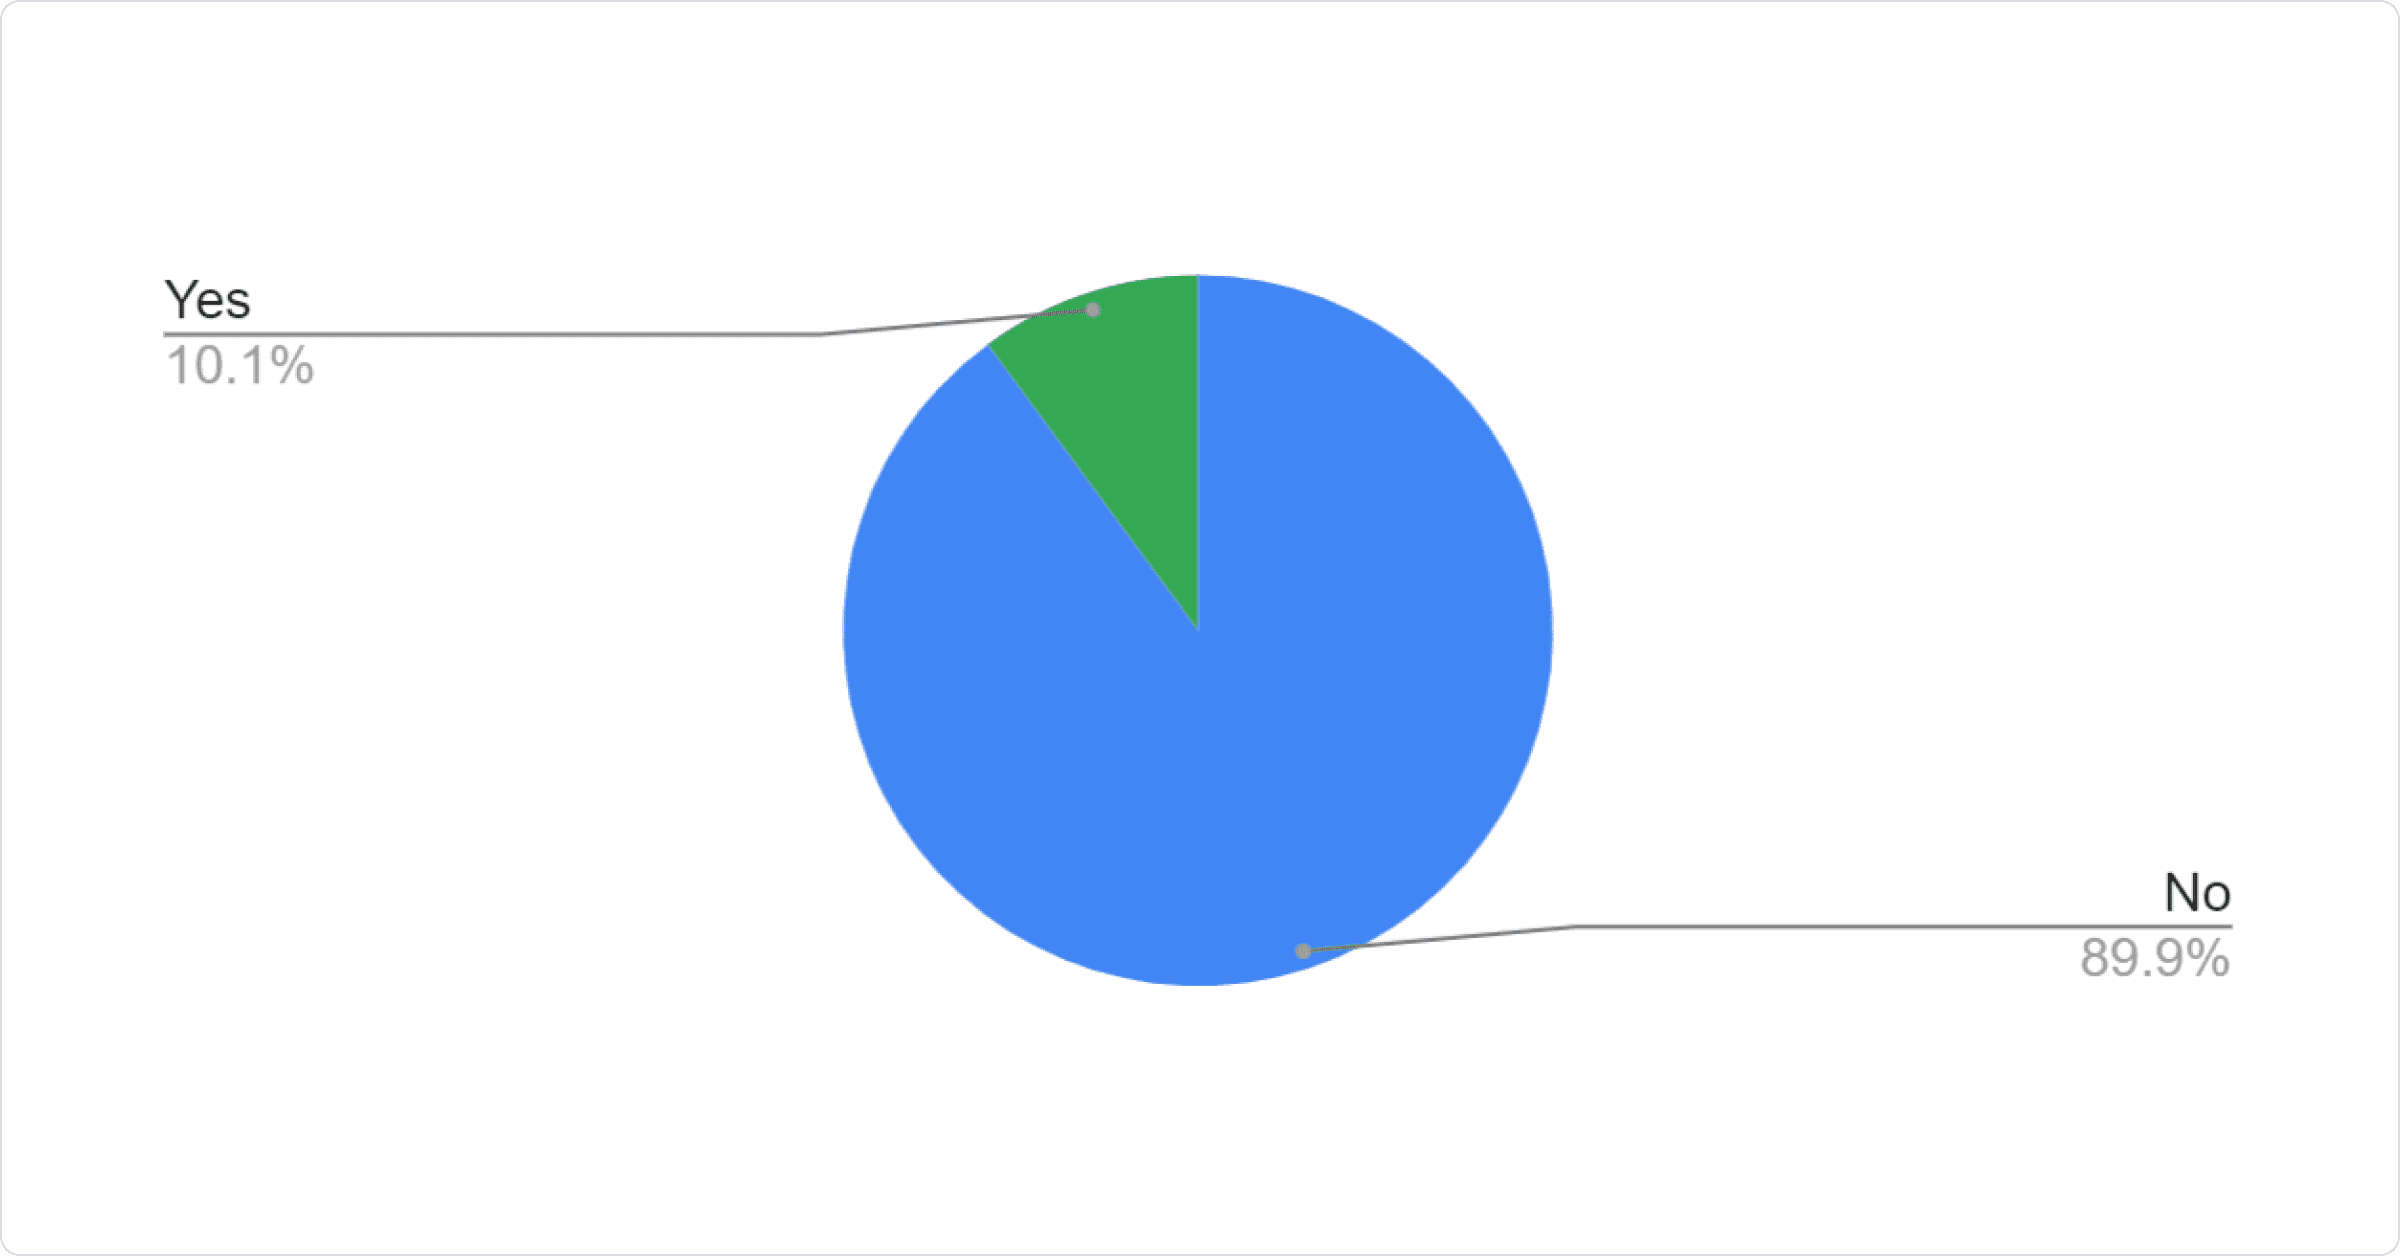 Pie chart: 89.90% No, 10.10% Yes